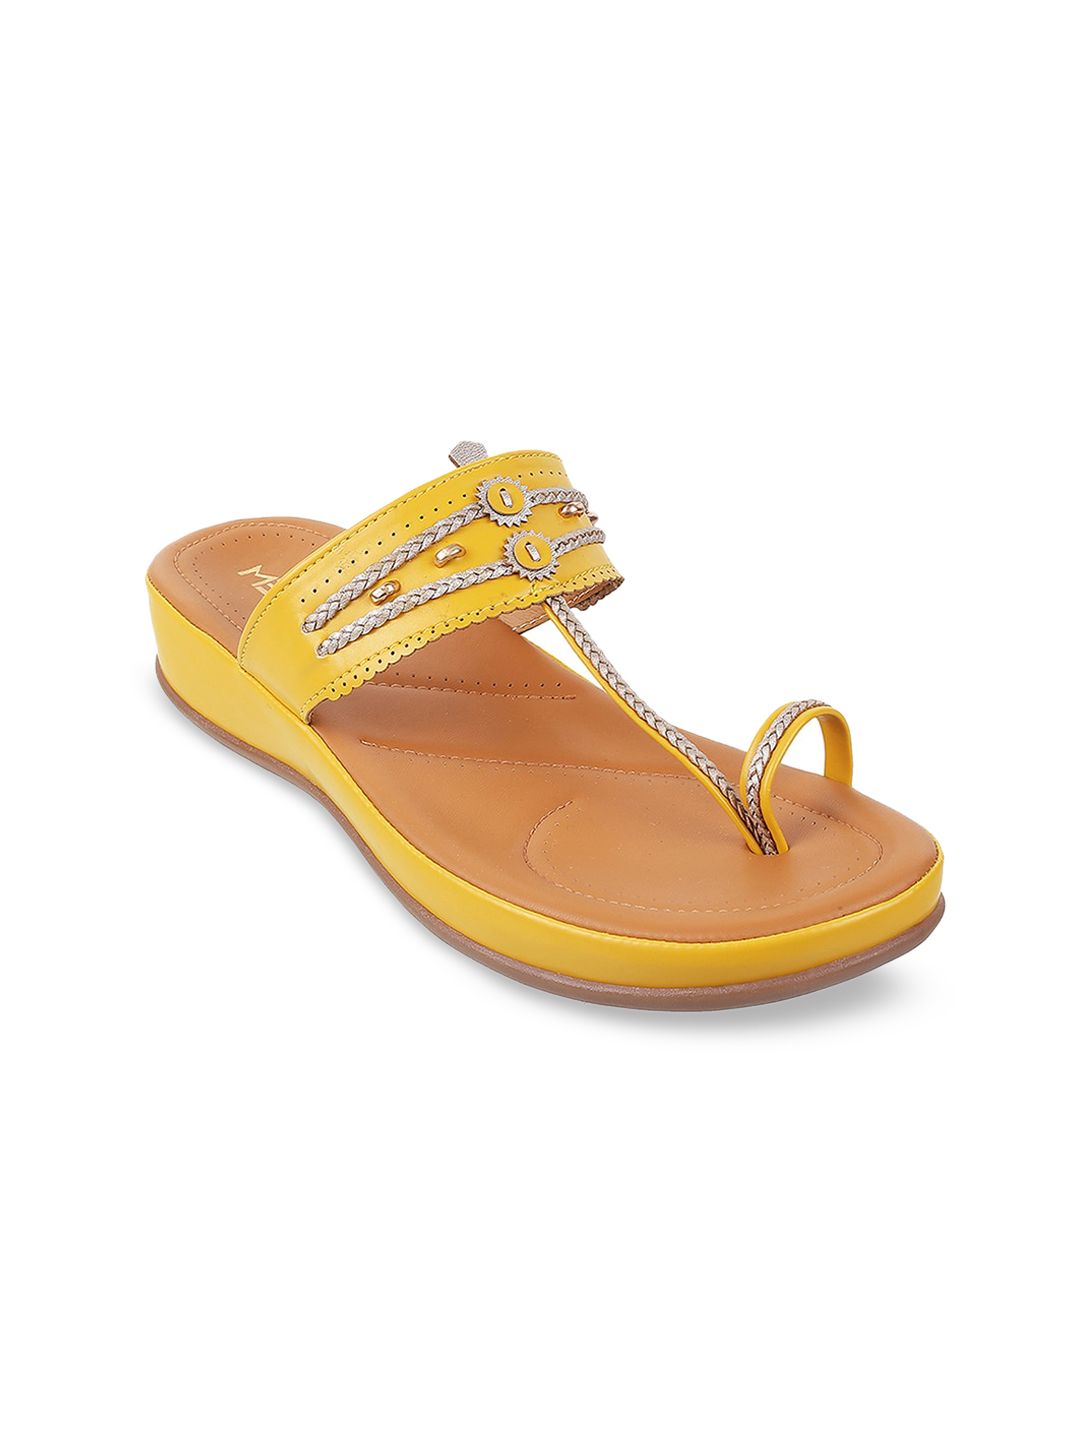 Metro Yellow Embellished Wedge Sandals Price in India